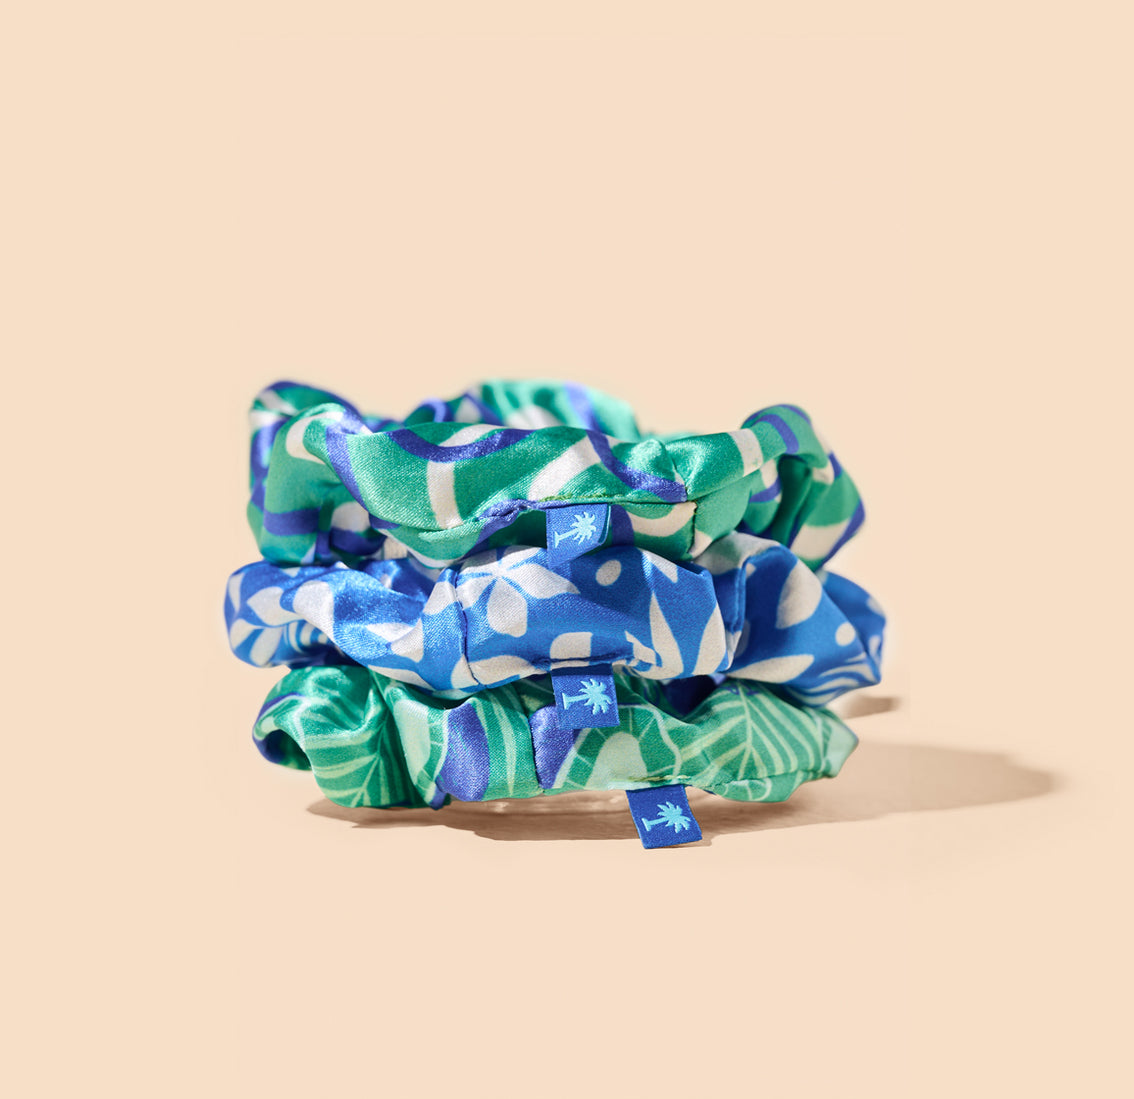 Three Vita Coco scrunchies with blue and green prints for hair.